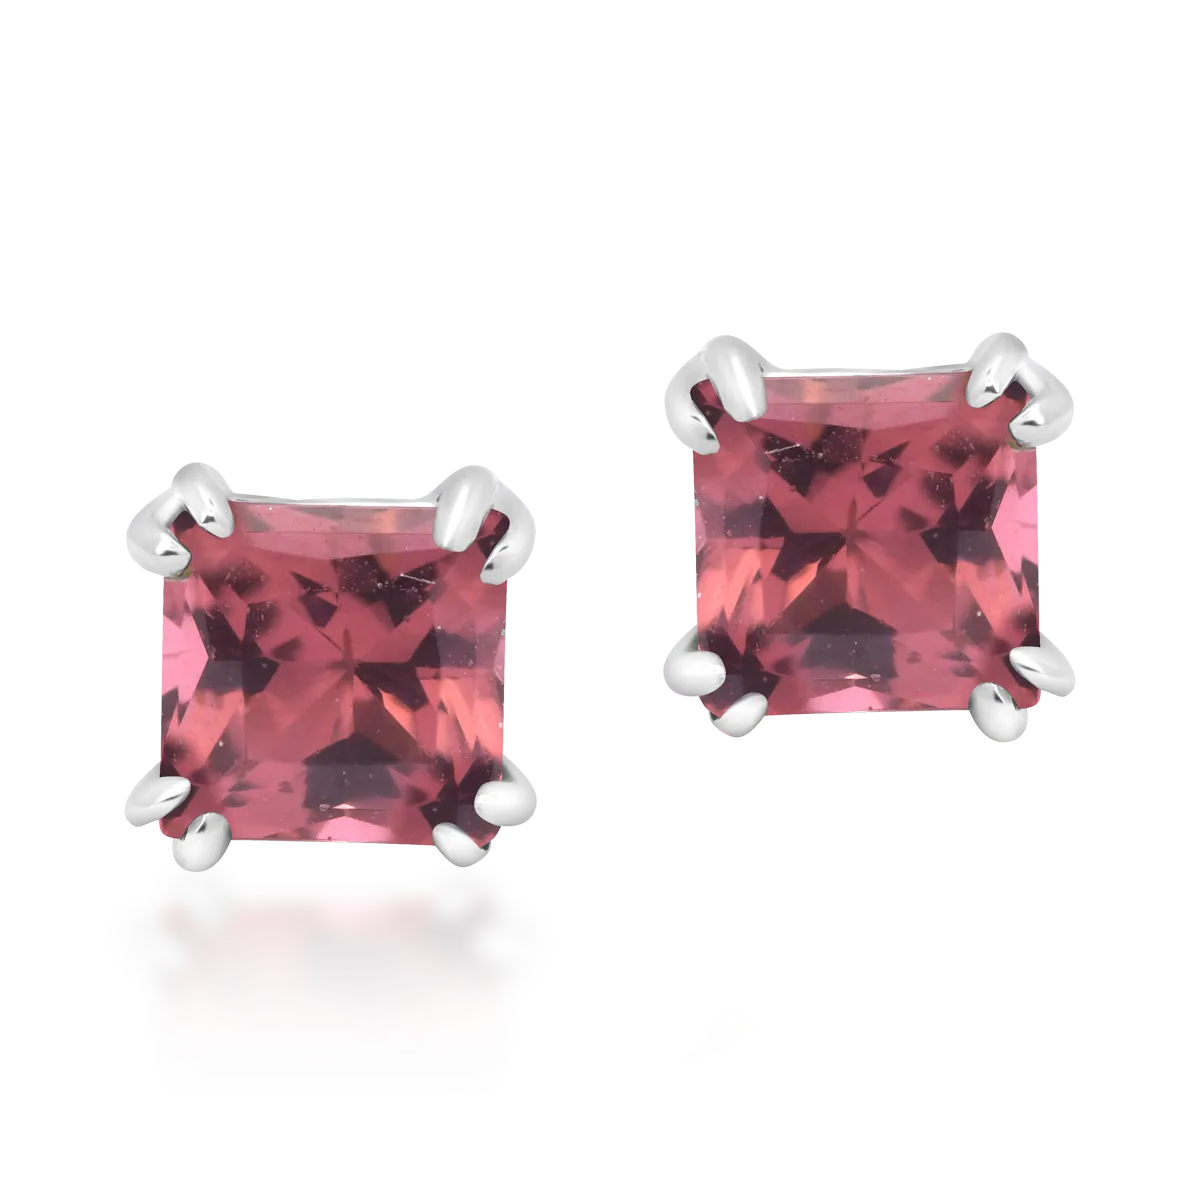 18K white gold earrings with 0.7ct multicolored tourmaline